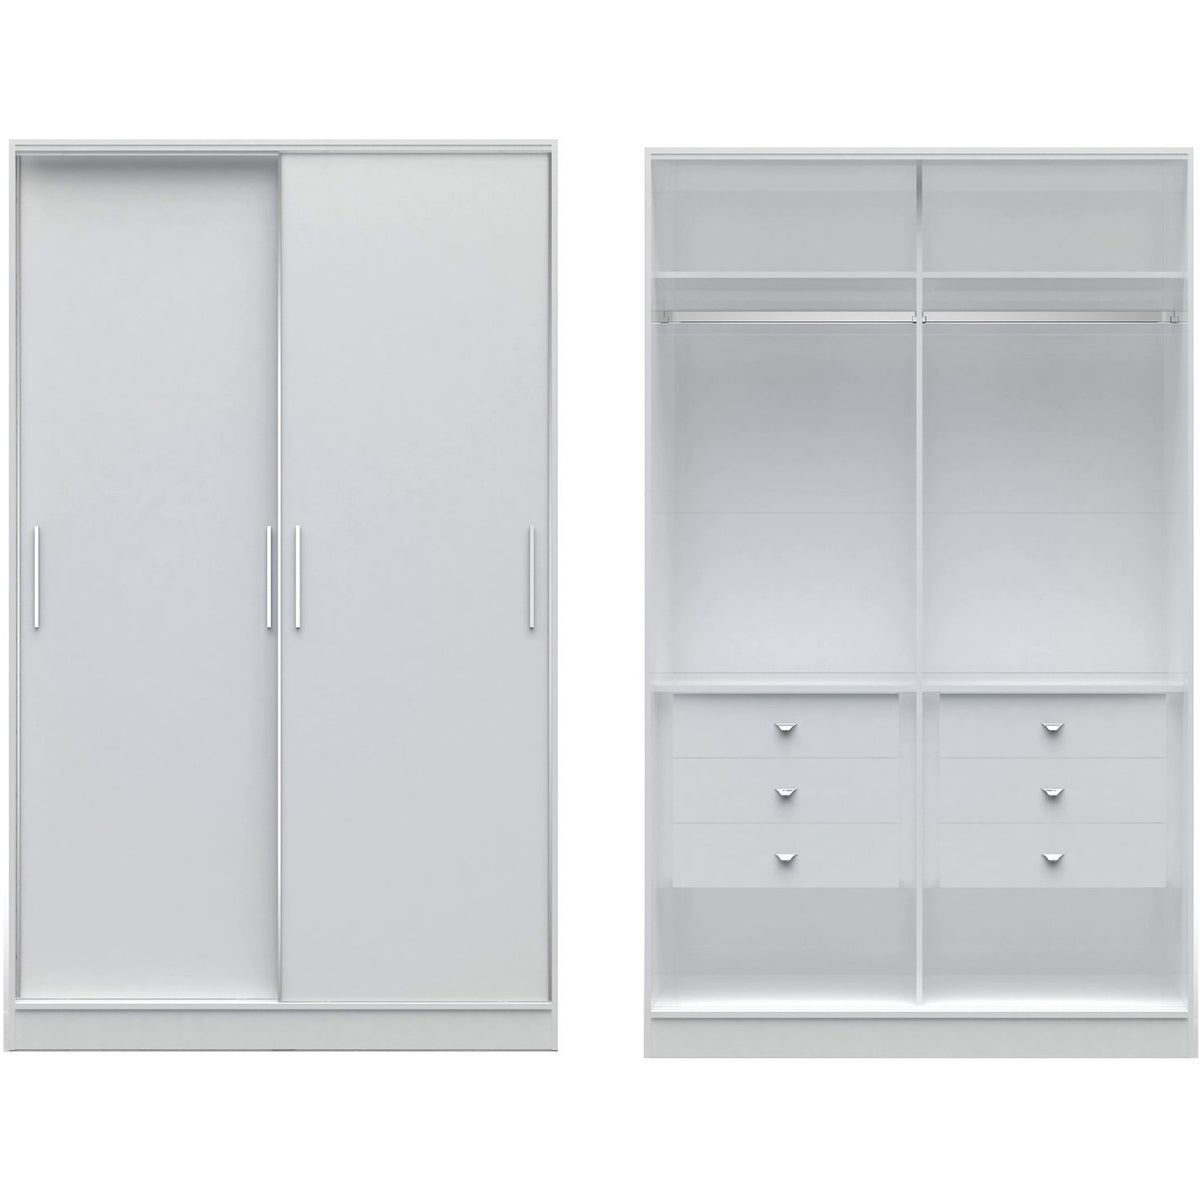 Manhattan Comfort Chelsea 1.0 - 54.33 inch Wide He/She Wardrobe with 6 Drawers and 2 Sliding Doors in White-Minimal & Modern